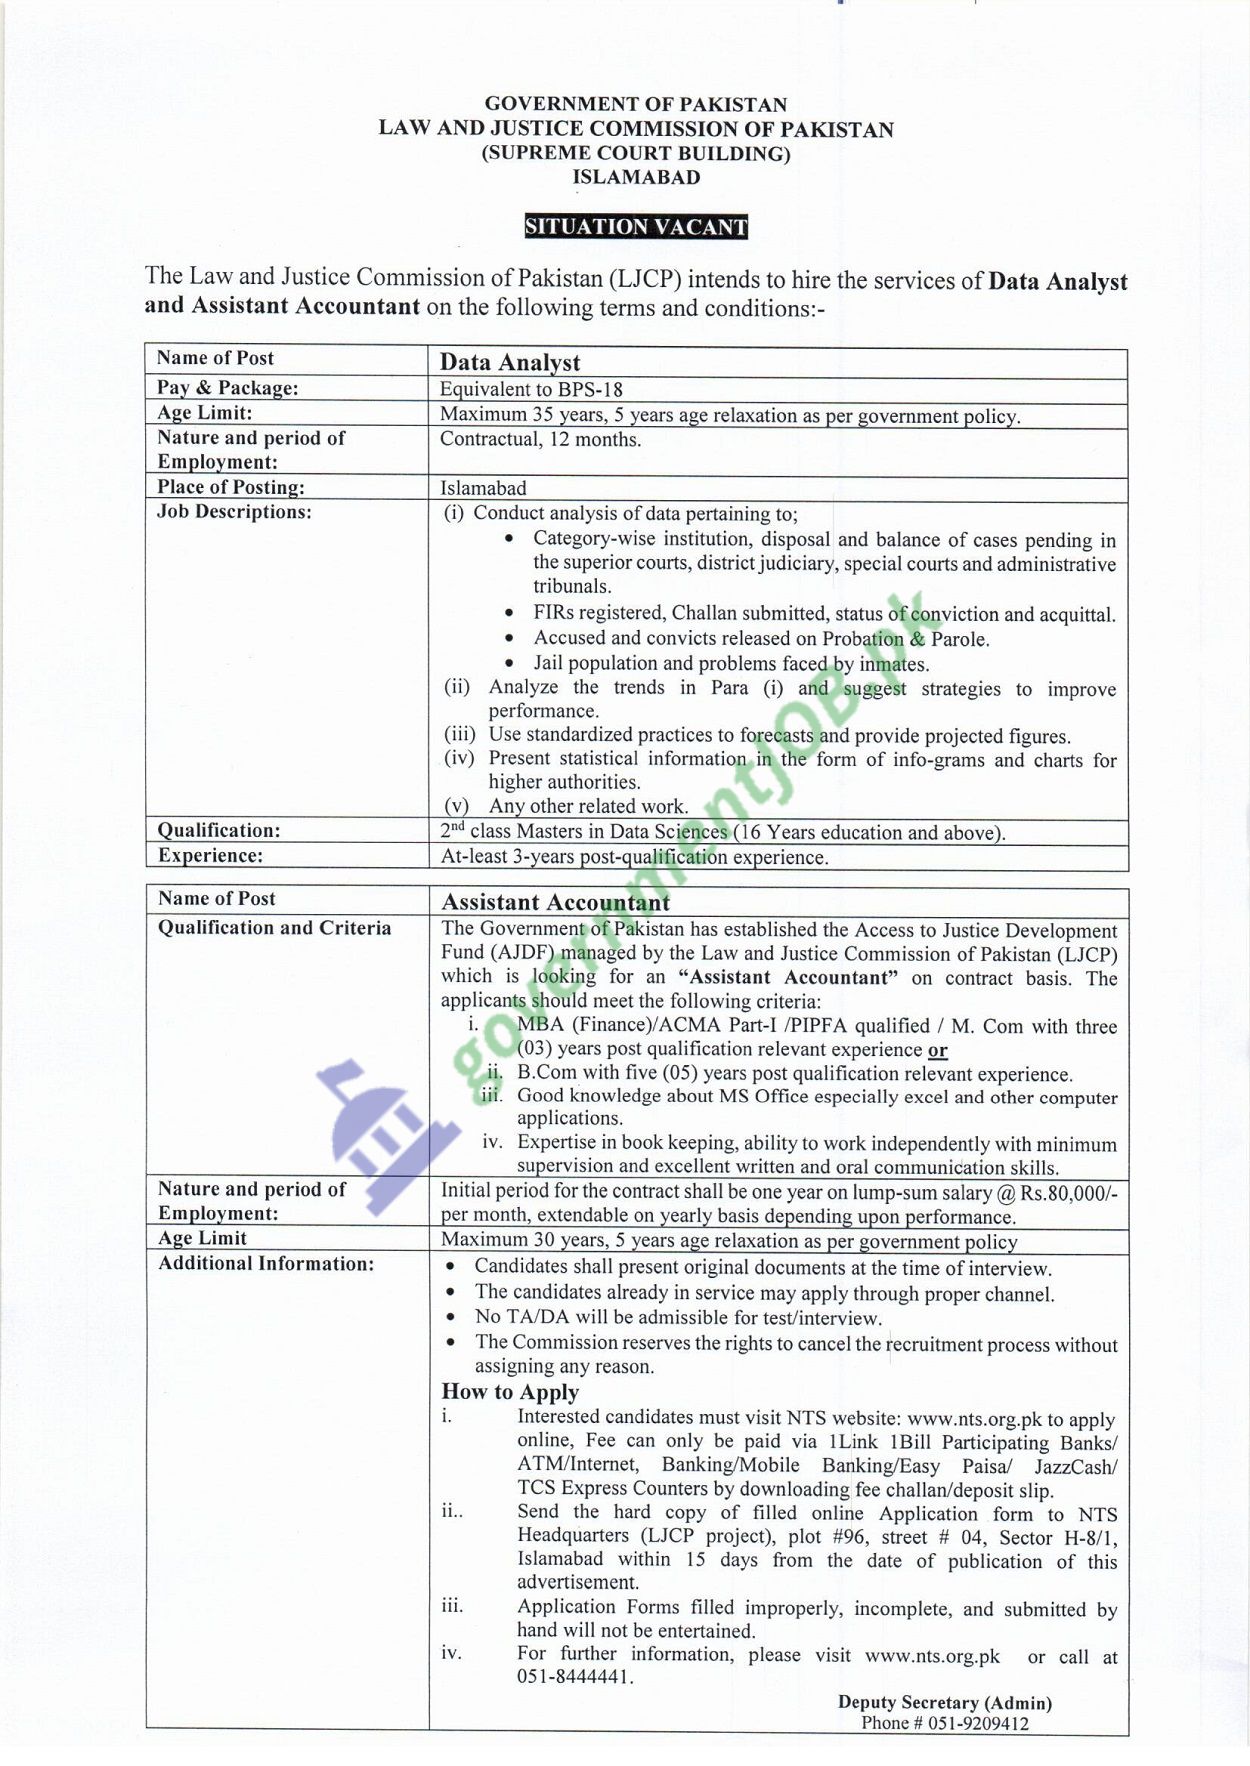 Law & Justice Commission of Pakistan, Situation Vacant 2023 - Apply Online